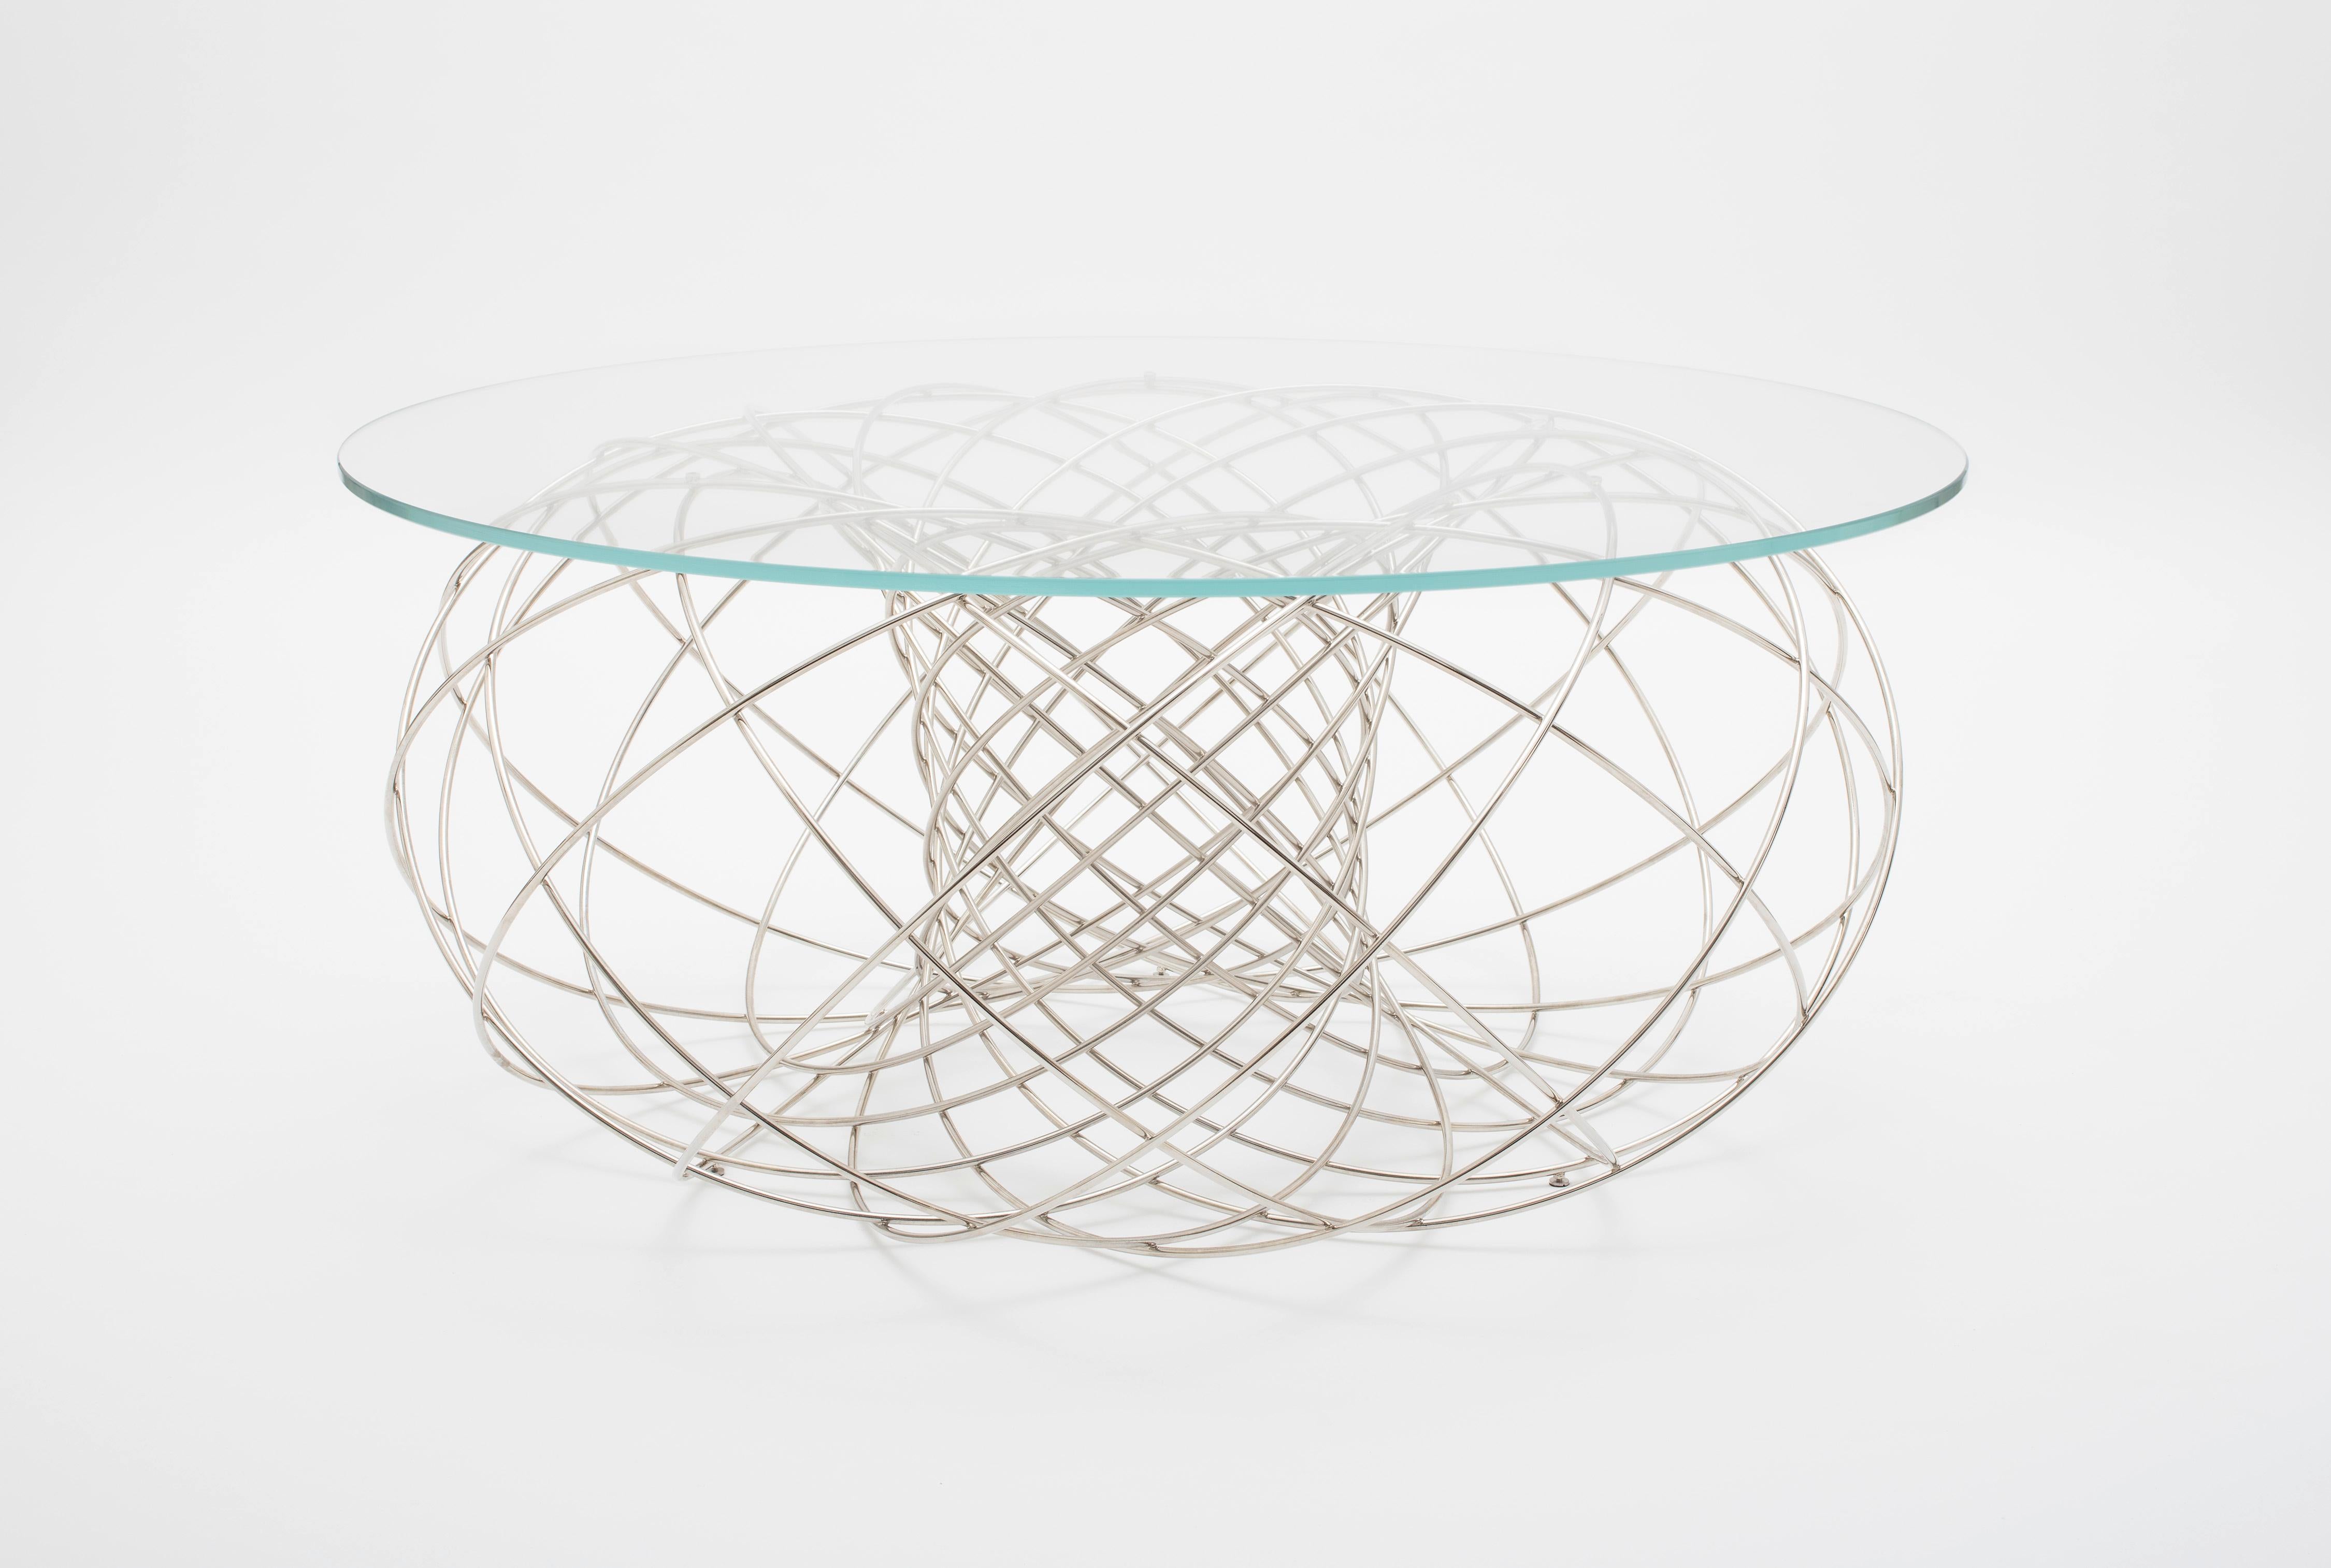 The design of the Villarceau Table is based on a geometric characteristic discovered by the French astronomer Yvon Villarceau. Main concept is to design a shape by using a mathematical achievement in order to explore a design concept based on the